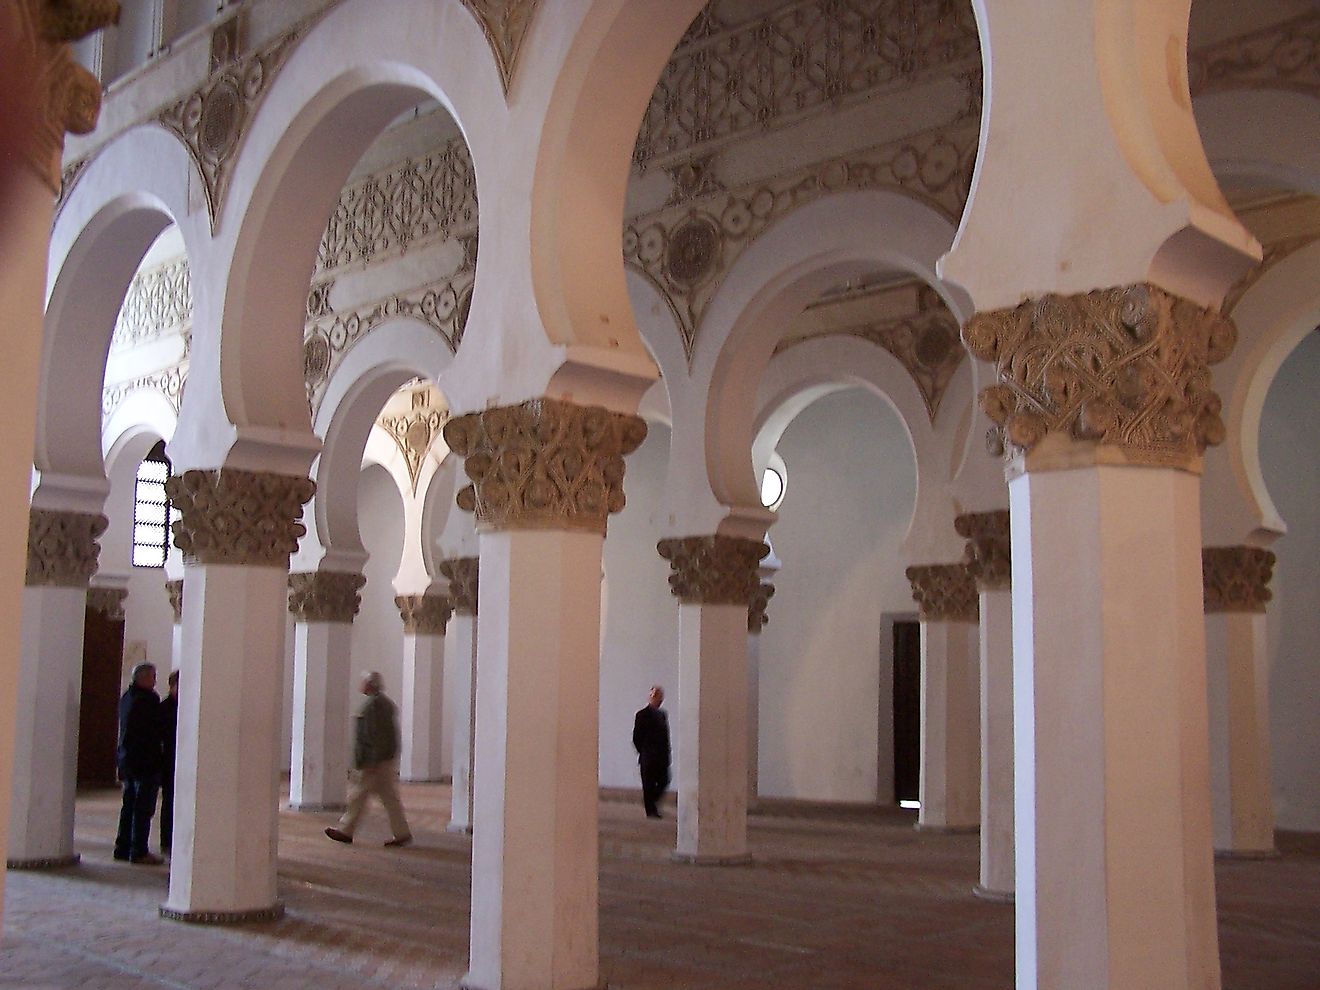 The interior of the Ibn Shushan Synagogue (now the Santa María la Blanca) in Toledo, Spain, showing the mixture of Jewish and Moorish-Islamic architectural elements that define much of Sephardic architecture.